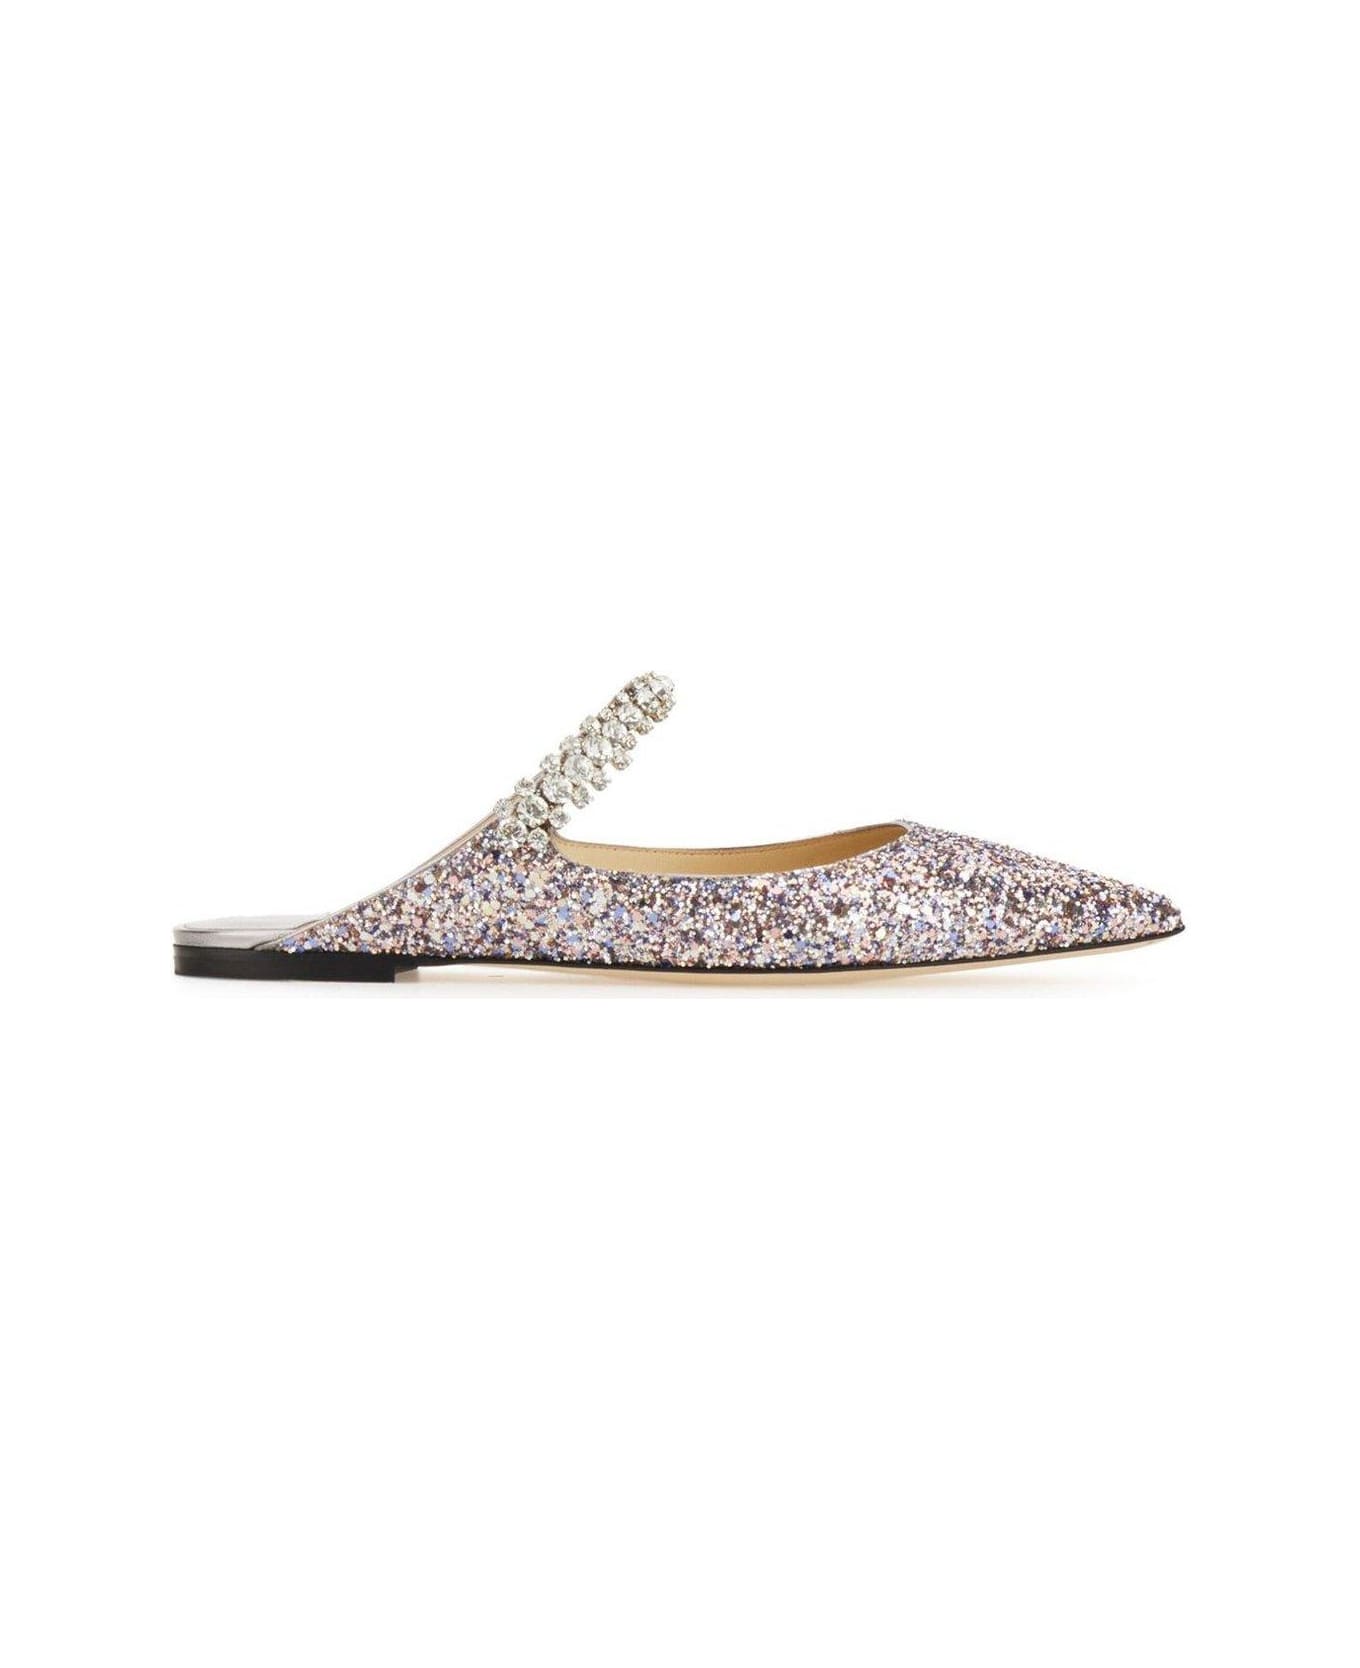 Jimmy Choo Bing Embellished Pointed Toe Ballerina Shoes - Silver